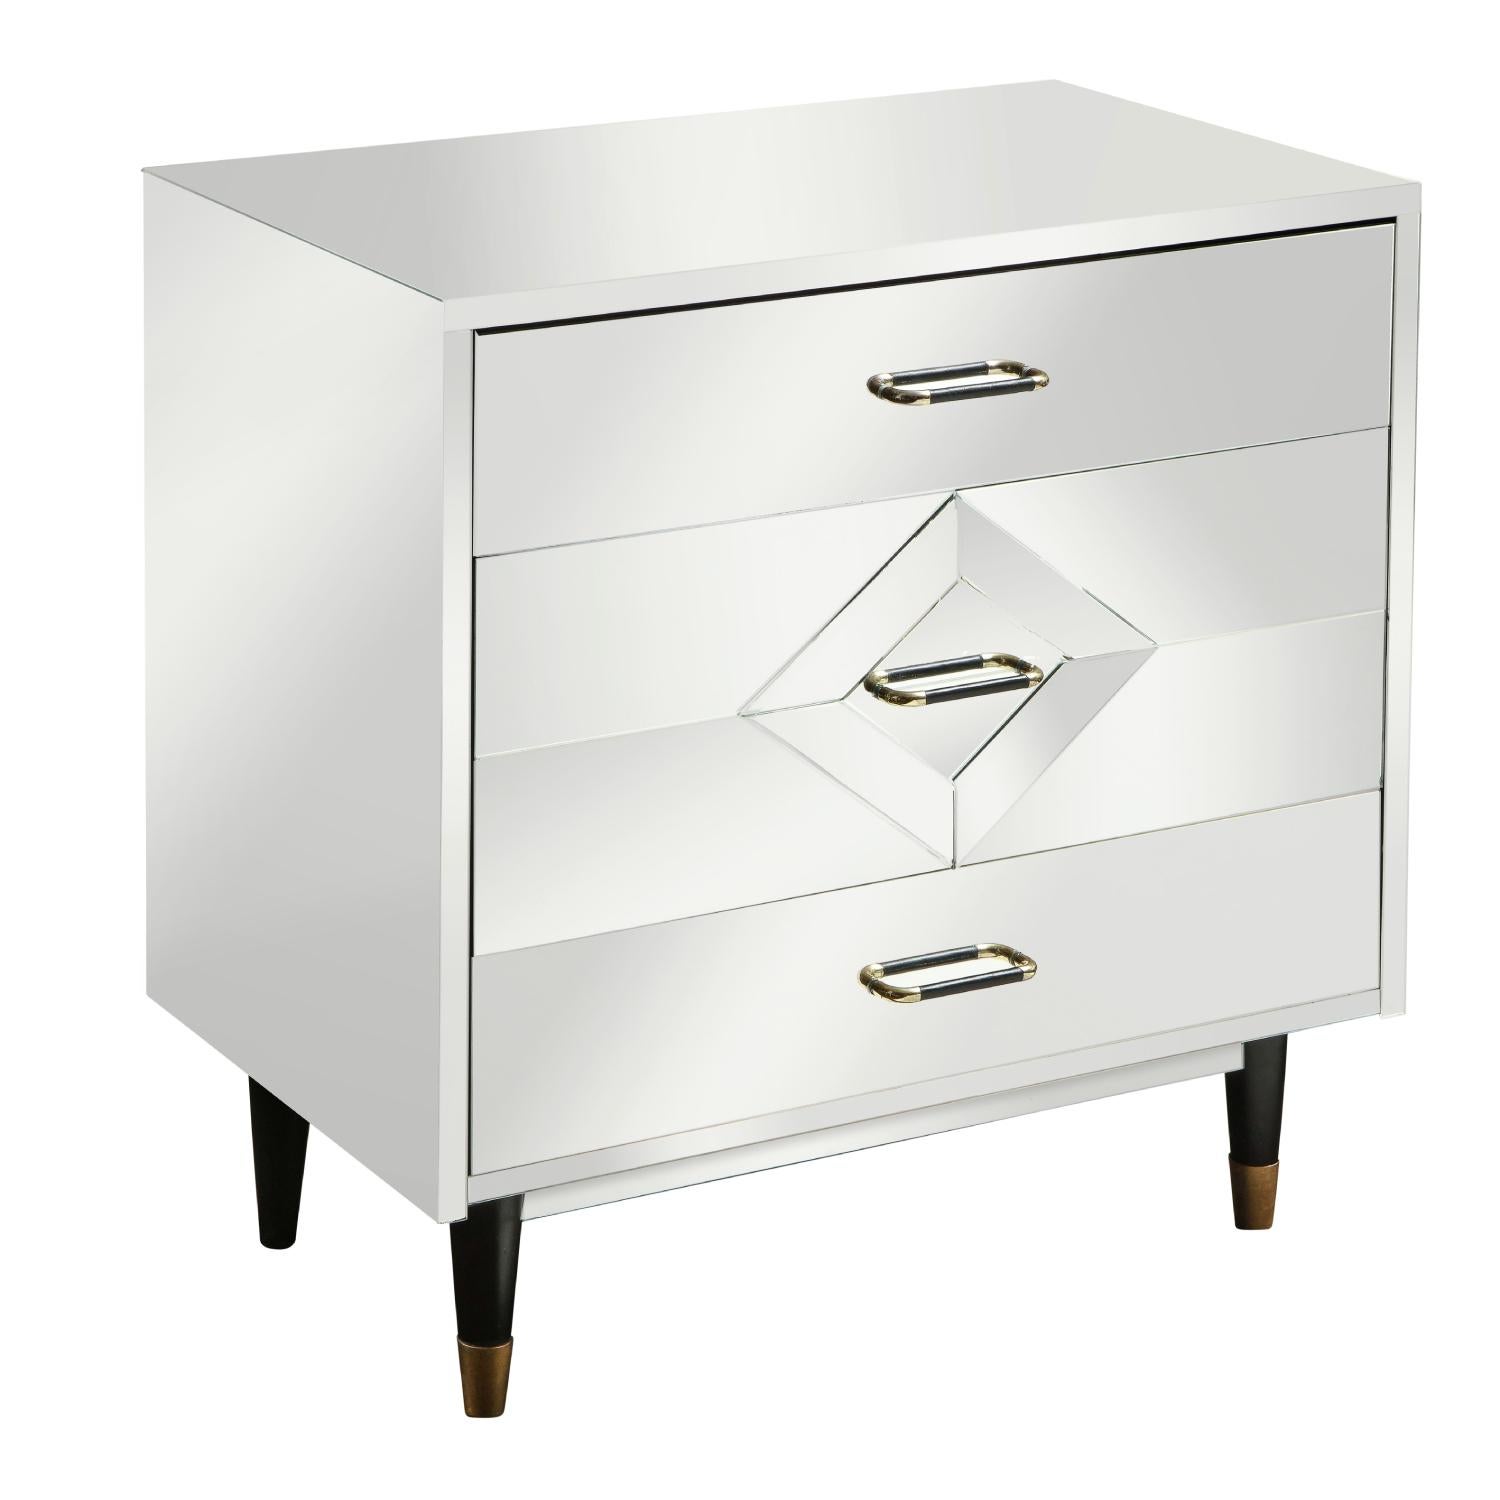 Single mirrored 3-drawer chest with diamond front accent on the center drawer, and black satin lacquered legs with brass sabots. Top and bottom drawers are 6